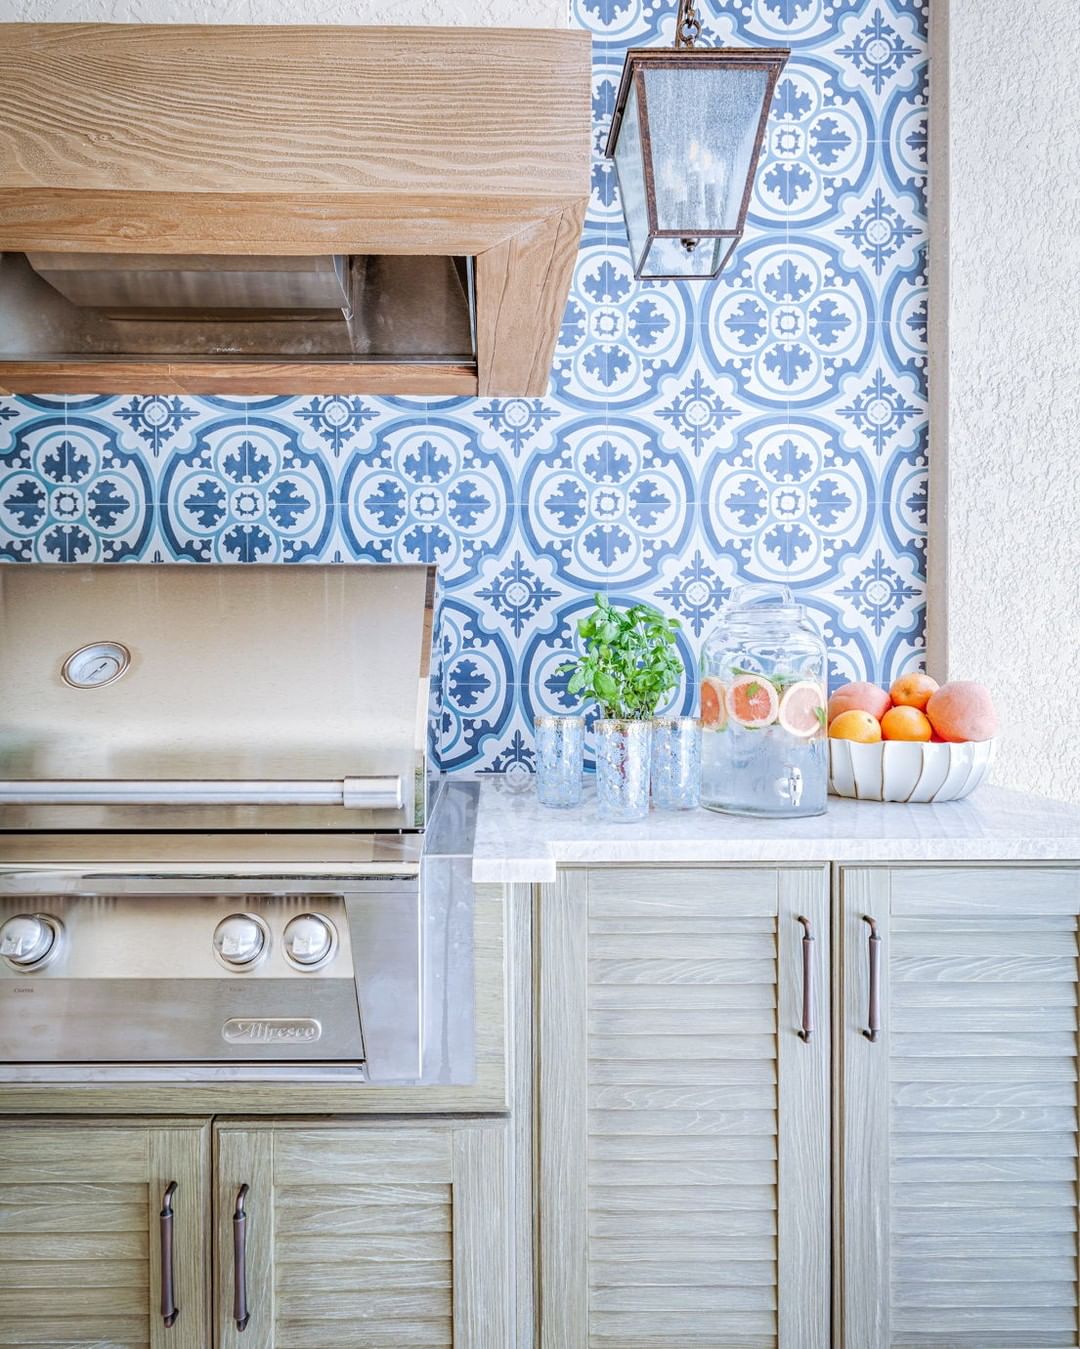 blue and white tile backsplash behind an outdoor grill photo by Instagram user @carriebrighamdesign